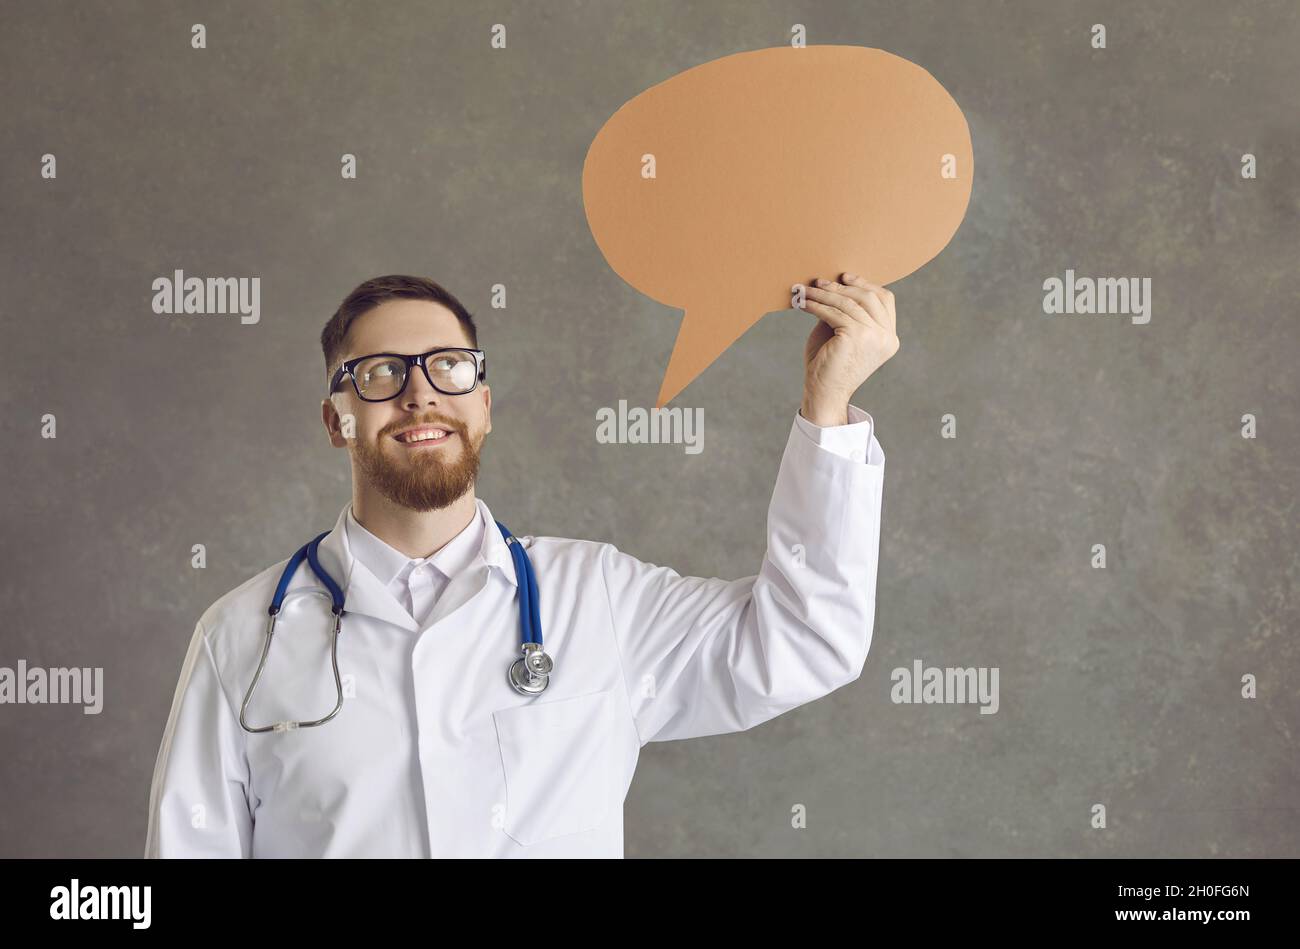 Happy young male nurse or doctor holding a blank speech balloon or thinking bubble Stock Photo